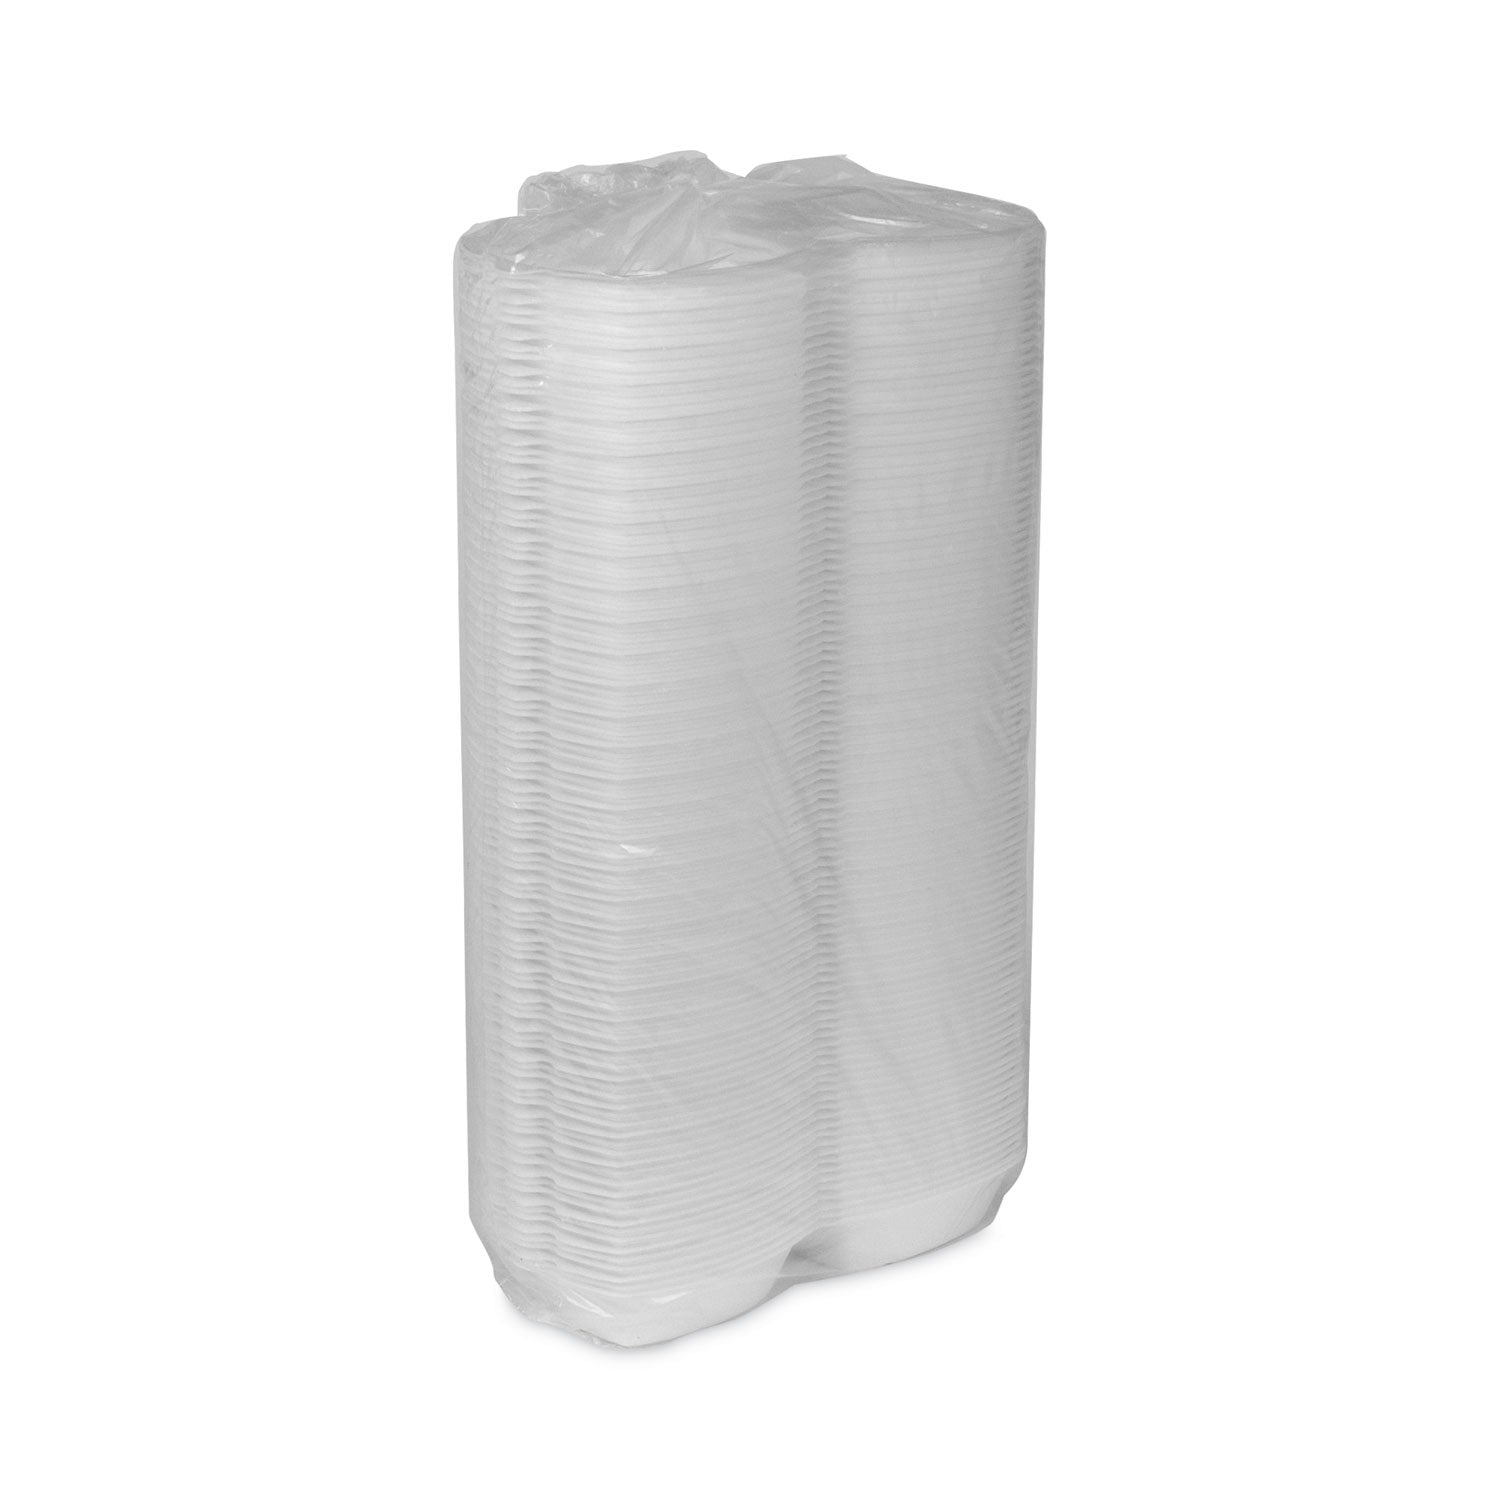 foam-hinged-lid-container-single-tab-lock-513-x-513-x-25-white-500-carton_pctyth100790000 - 3